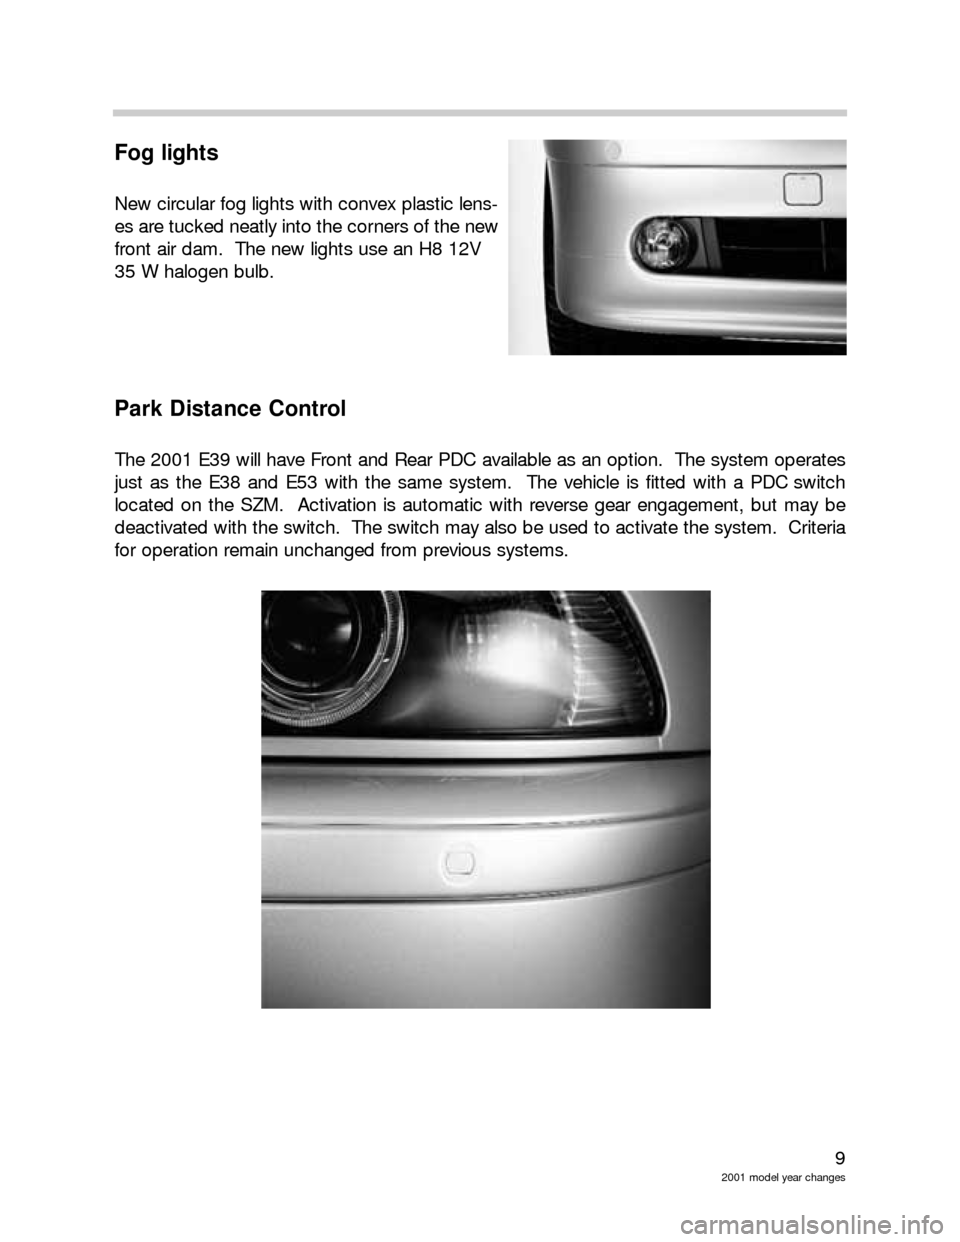 BMW 5 SERIES 2003 E39 Model Yar Changes 9
2001 model year changes
Fog lights
New circular fog lights with convex plastic lens-
es are tucked neatly into the corners of the new
front air dam.  The new lights use an H8 12V 
35 W halogen bulb.